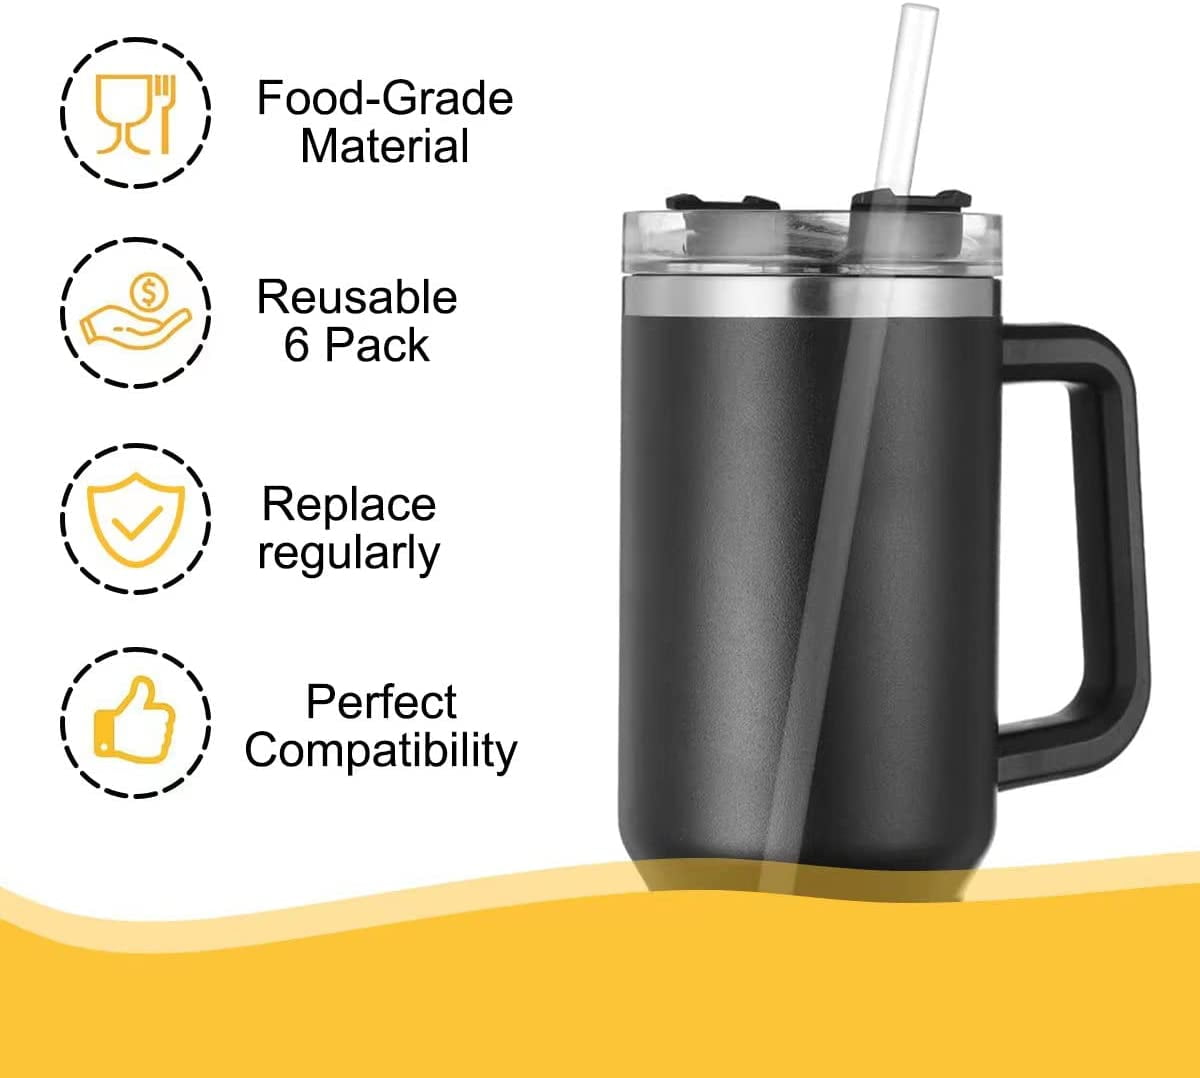 Bluwing 2 Pcs Stainless Steel Straws for 40 oz Stanley Tumbler, Replacement  40 oz Stanley Cup Straw Accessories with Silicone Tips and Cleaning Brush